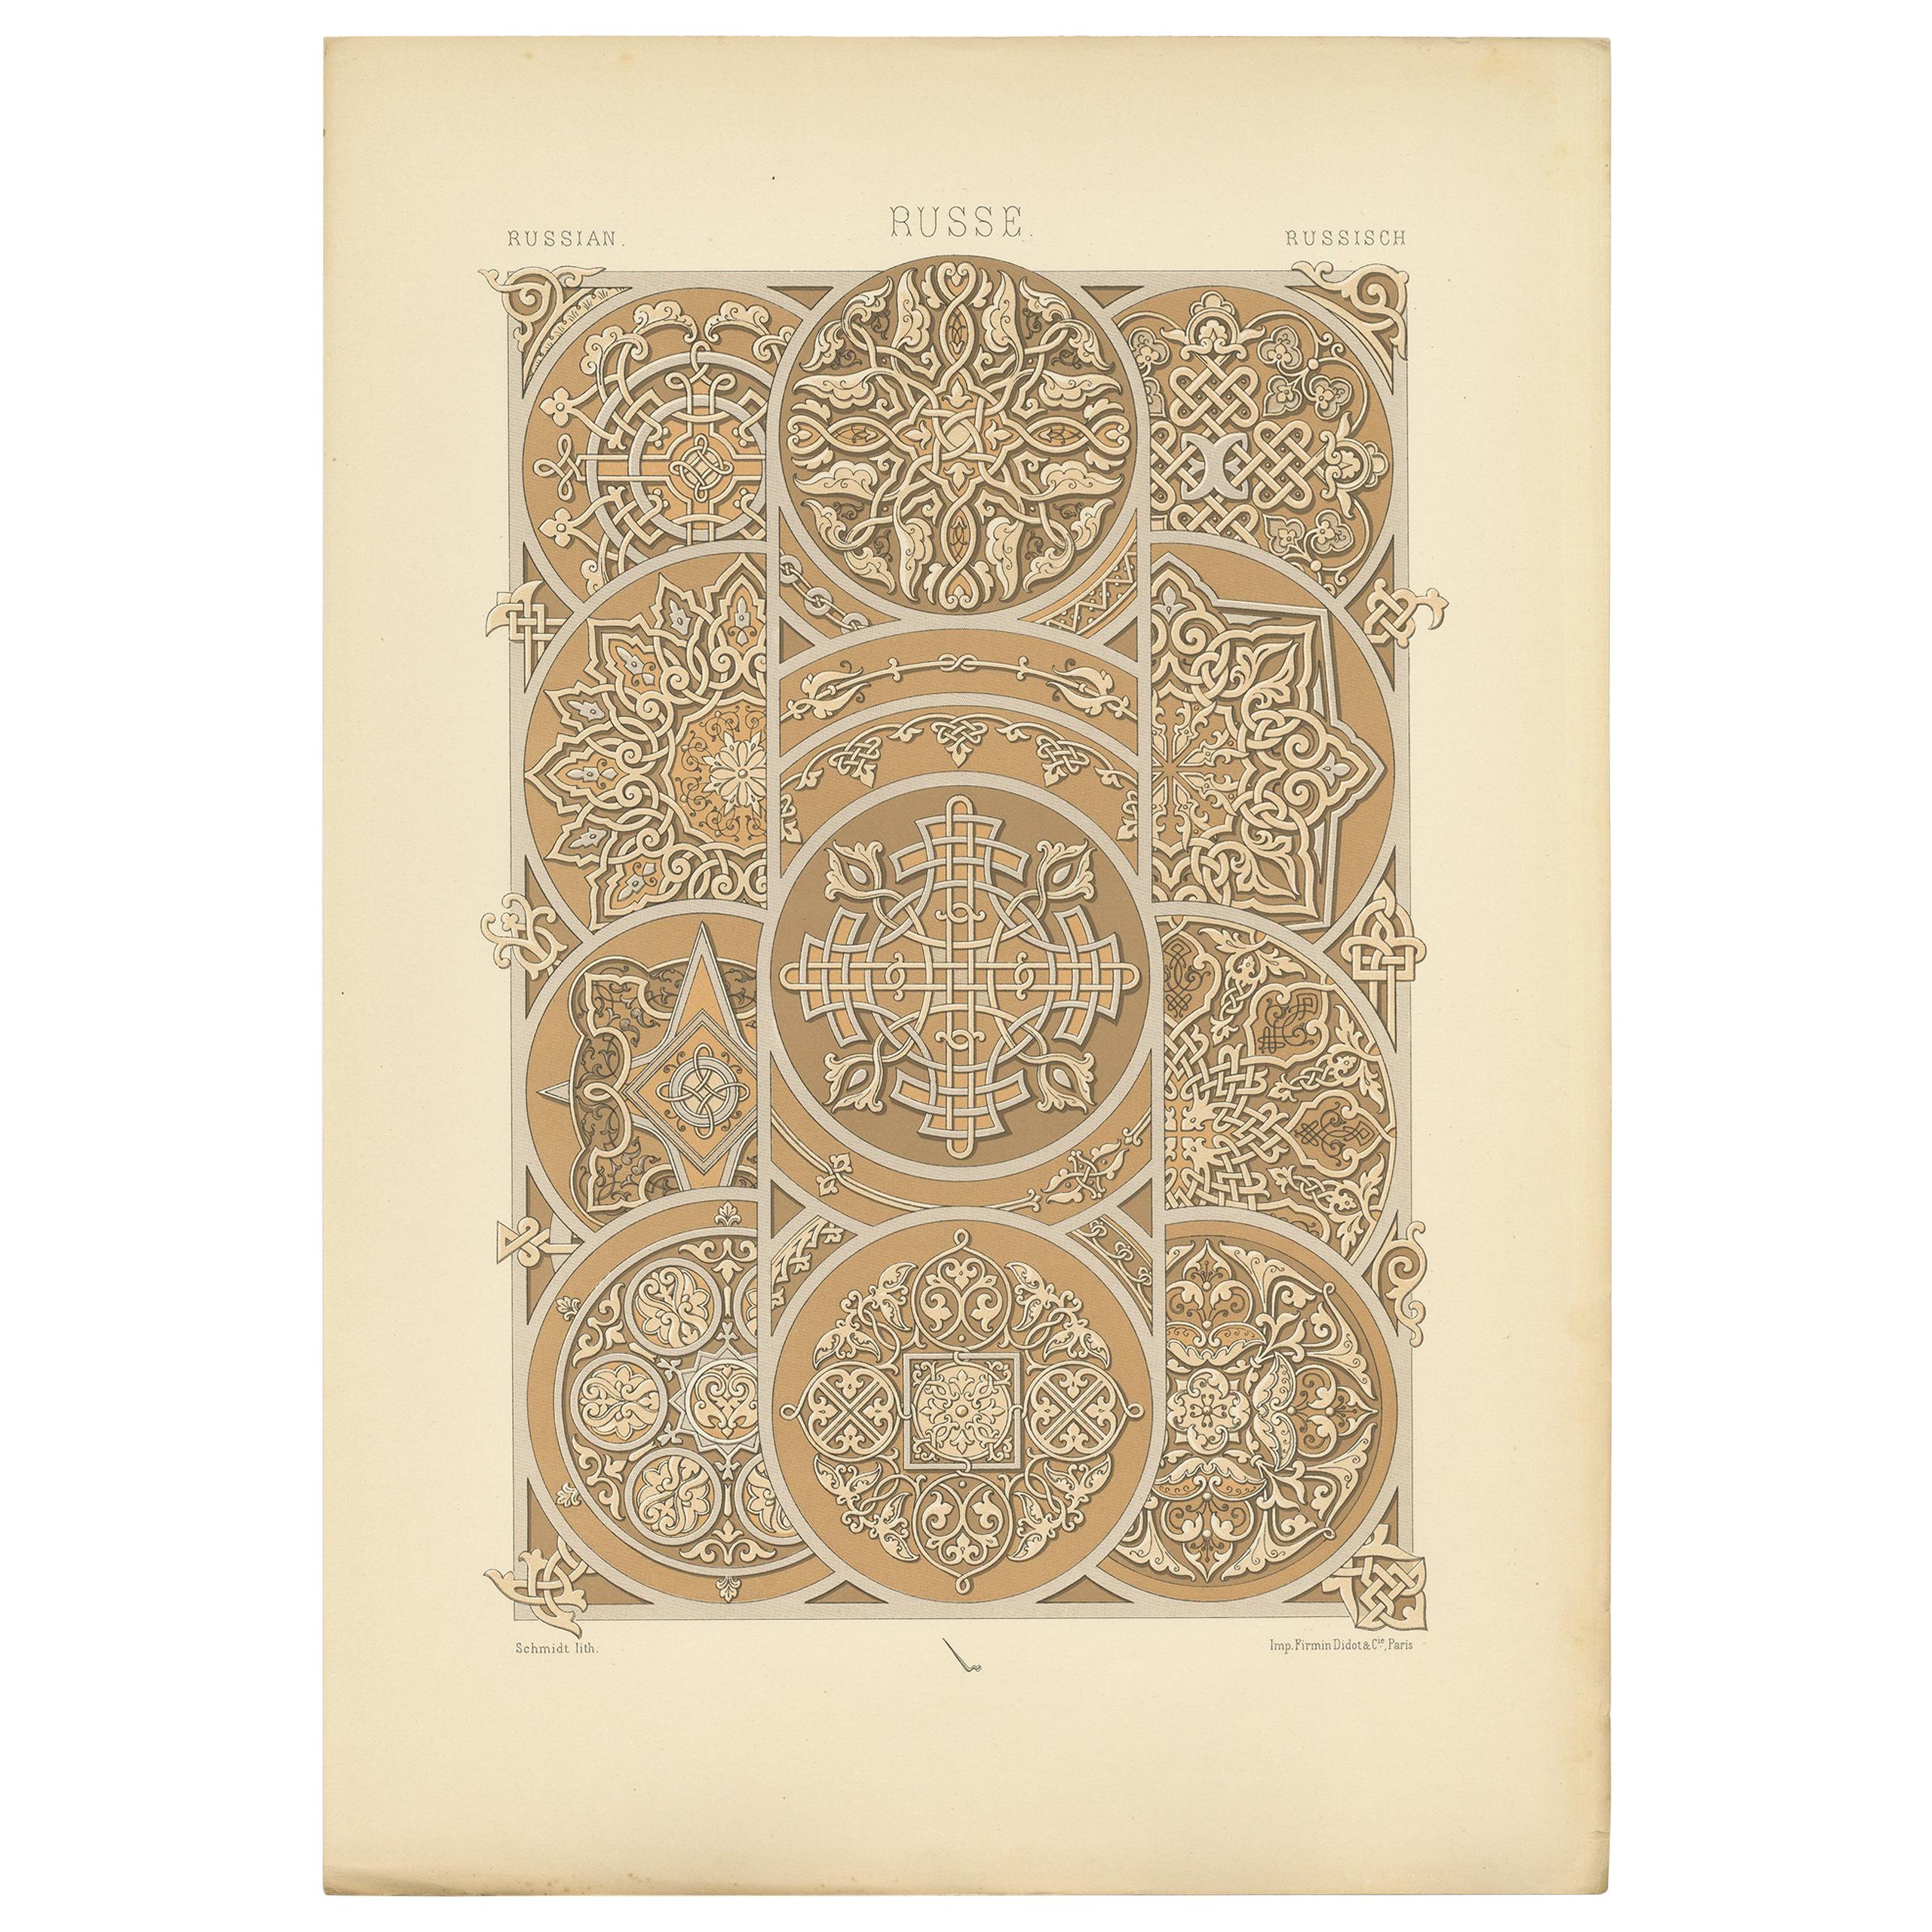 Pl. 67 Antique Print of Russian Motifs from Engraved and Chased Metal by Racinet